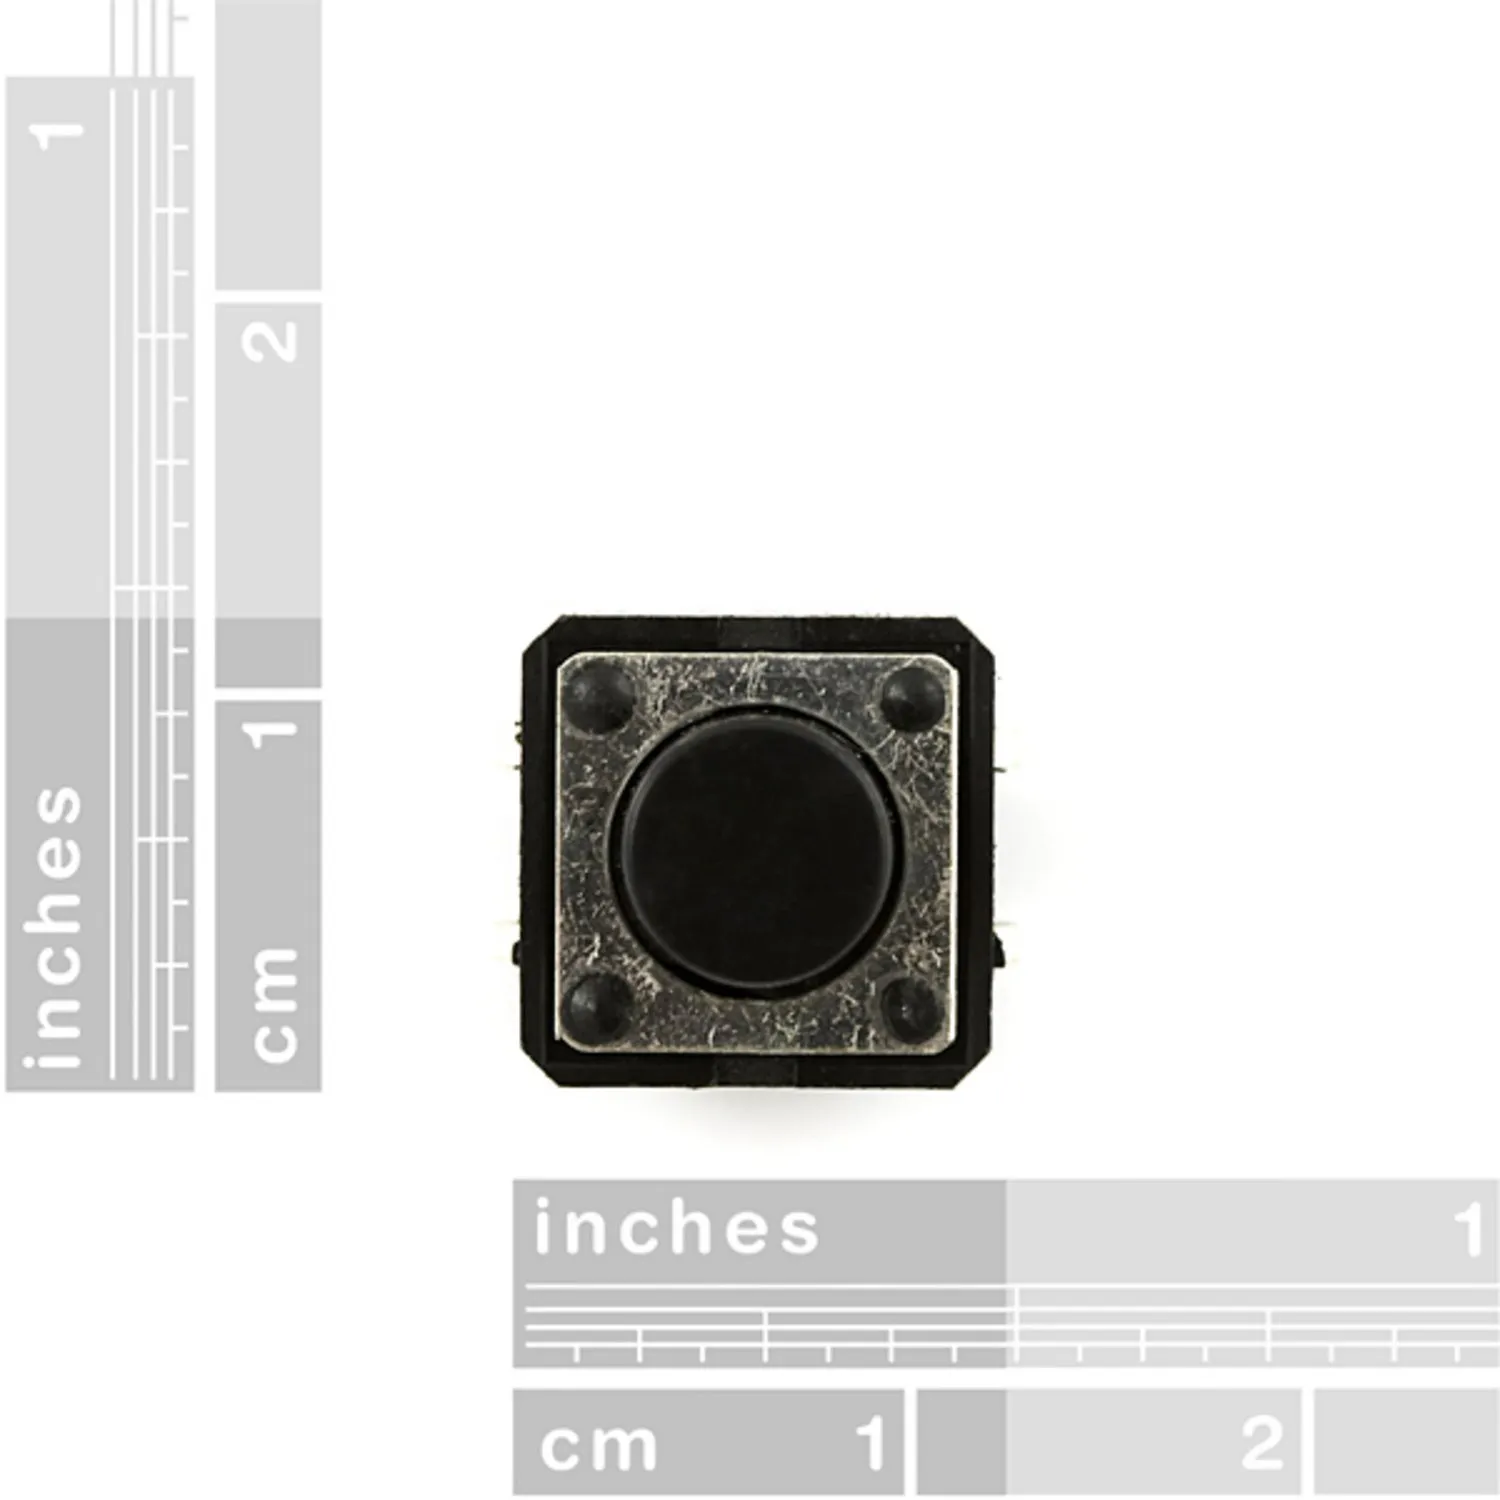 Photo of Momentary Pushbutton Switch - 12mm Square